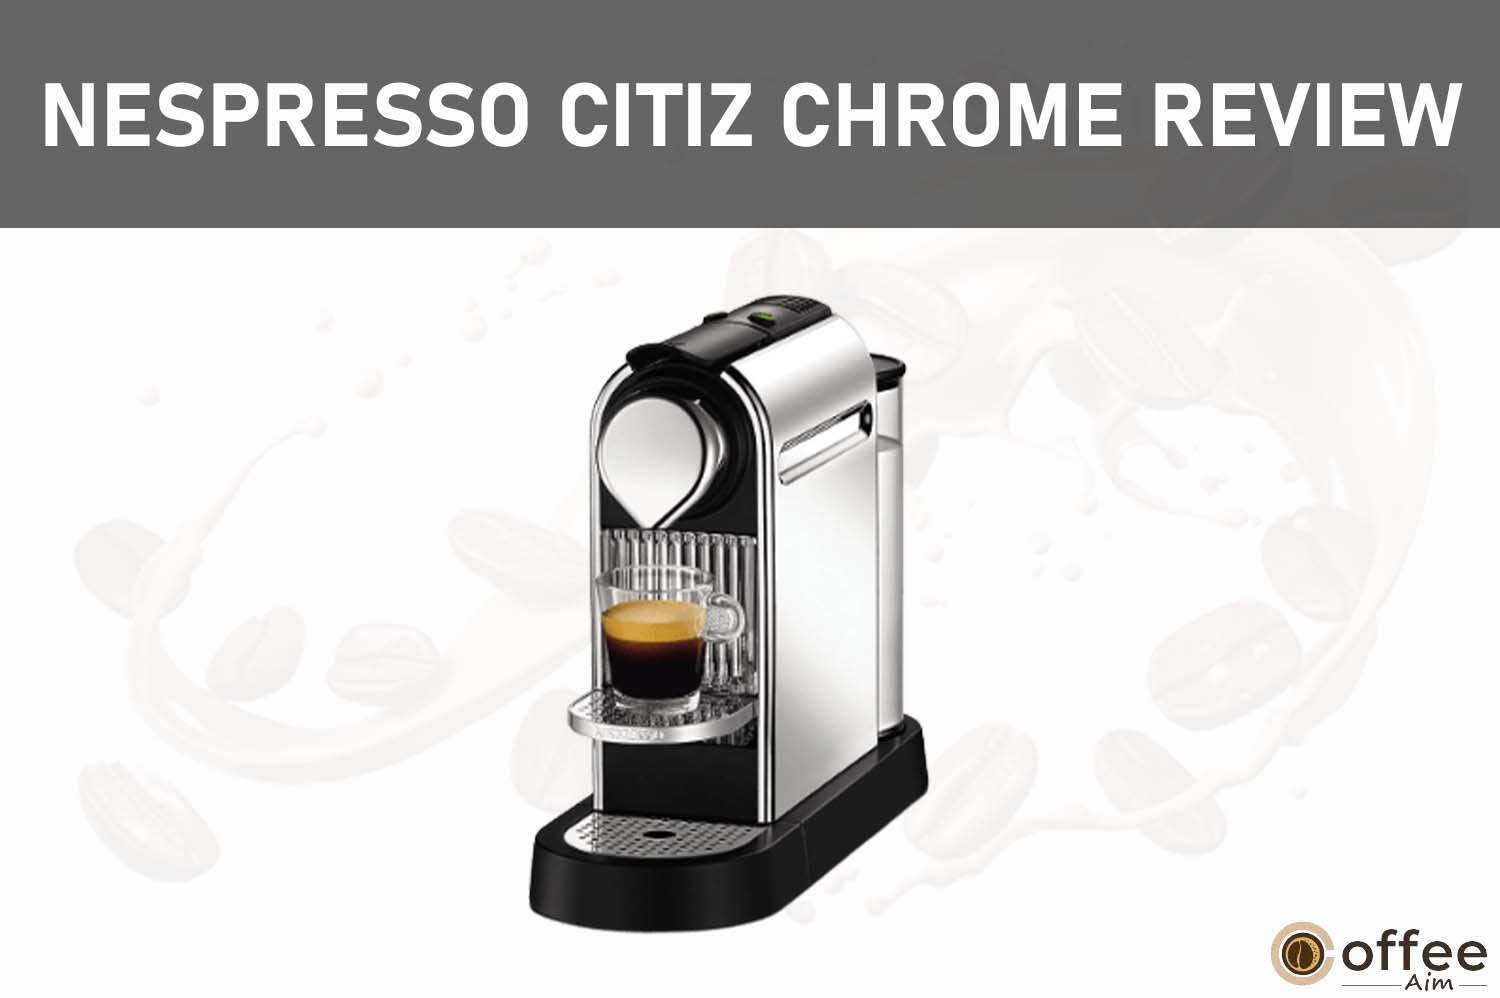 Featured image for the article"Nespresso Citiz Chrome Review"